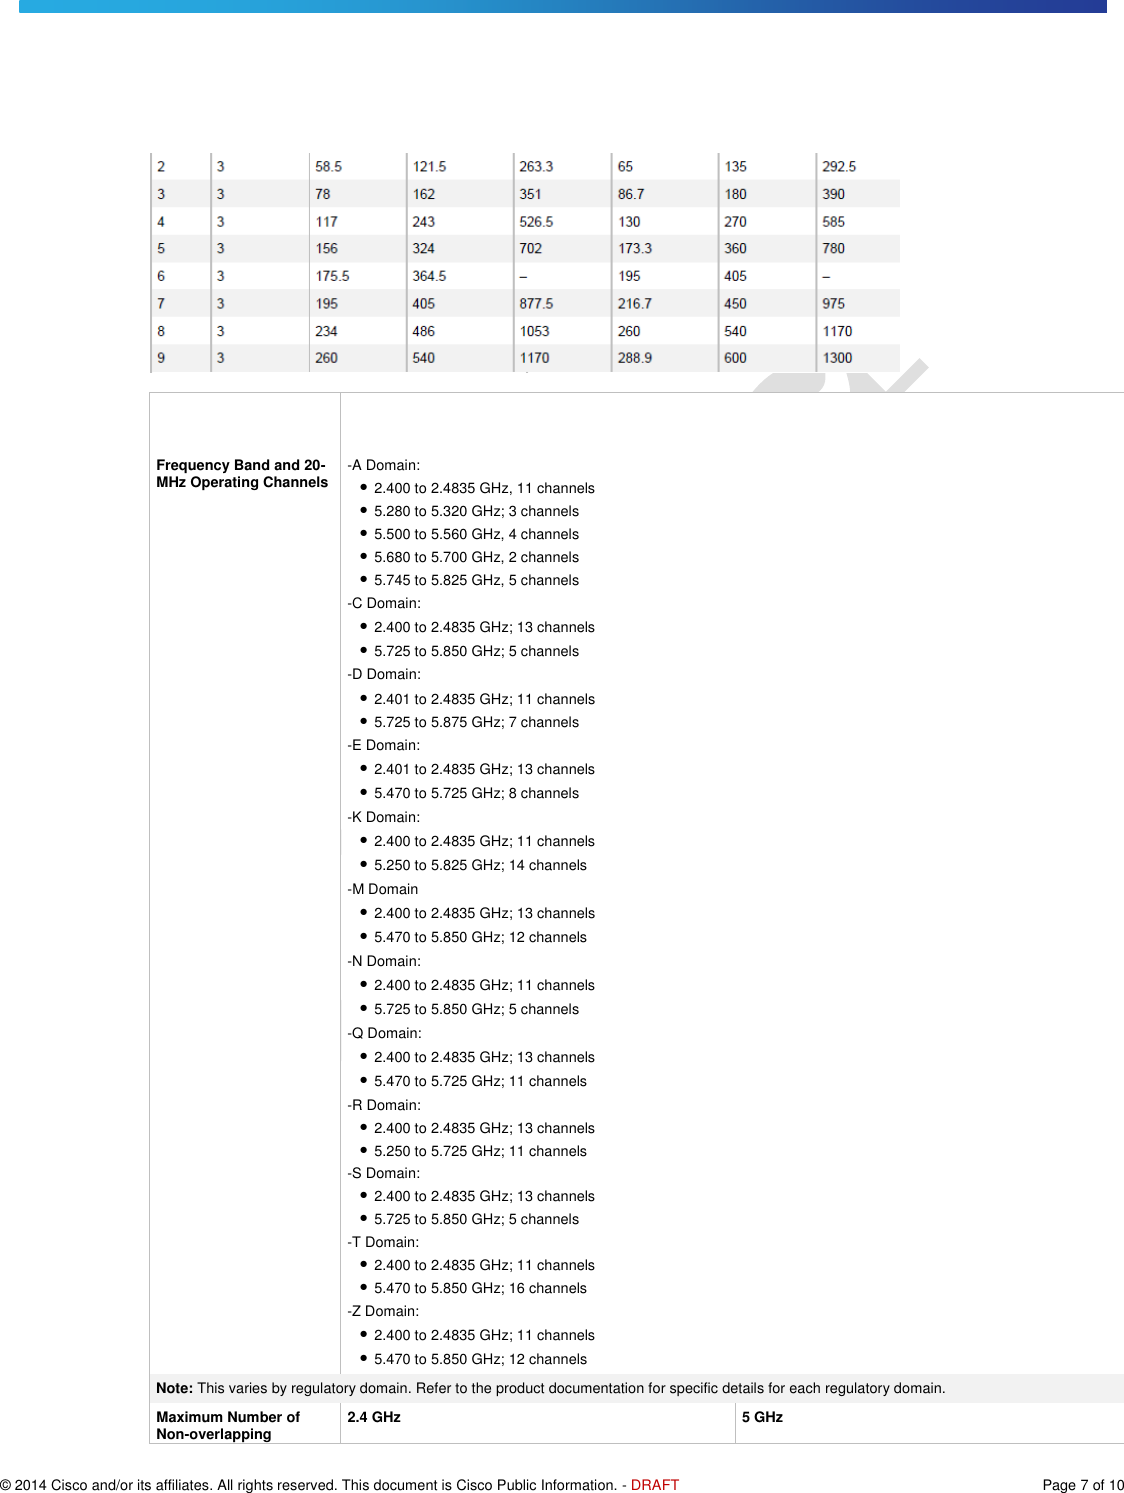   © 2014 Cisco and/or its affiliates. All rights reserved. This document is Cisco Public Information. - DRAFT  Page 7 of 10        Frequency Band and 20-MHz Operating Channels -A Domain: ● 2.400 to 2.4835 GHz, 11 channels ● 5.280 to 5.320 GHz; 3 channels ● 5.500 to 5.560 GHz, 4 channels ● 5.680 to 5.700 GHz, 2 channels ● 5.745 to 5.825 GHz, 5 channels -C Domain: ● 2.400 to 2.4835 GHz; 13 channels ● 5.725 to 5.850 GHz; 5 channels -D Domain: ● 2.401 to 2.4835 GHz; 11 channels ● 5.725 to 5.875 GHz; 7 channels  -E Domain: ● 2.401 to 2.4835 GHz; 13 channels ● 5.470 to 5.725 GHz; 8 channels -K Domain: ● 2.400 to 2.4835 GHz; 11 channels ● 5.250 to 5.825 GHz; 14 channels -M Domain ● 2.400 to 2.4835 GHz; 13 channels ● 5.470 to 5.850 GHz; 12 channels -N Domain: ● 2.400 to 2.4835 GHz; 11 channels ● 5.725 to 5.850 GHz; 5 channels -Q Domain: ● 2.400 to 2.4835 GHz; 13 channels ● 5.470 to 5.725 GHz; 11 channels -R Domain: ● 2.400 to 2.4835 GHz; 13 channels ● 5.250 to 5.725 GHz; 11 channels -S Domain: ● 2.400 to 2.4835 GHz; 13 channels ● 5.725 to 5.850 GHz; 5 channels -T Domain: ● 2.400 to 2.4835 GHz; 11 channels ● 5.470 to 5.850 GHz; 16 channels -Z Domain: ● 2.400 to 2.4835 GHz; 11 channels ● 5.470 to 5.850 GHz; 12 channels Note: This varies by regulatory domain. Refer to the product documentation for specific details for each regulatory domain. Maximum Number of Non-overlapping 2.4 GHz 5 GHz 